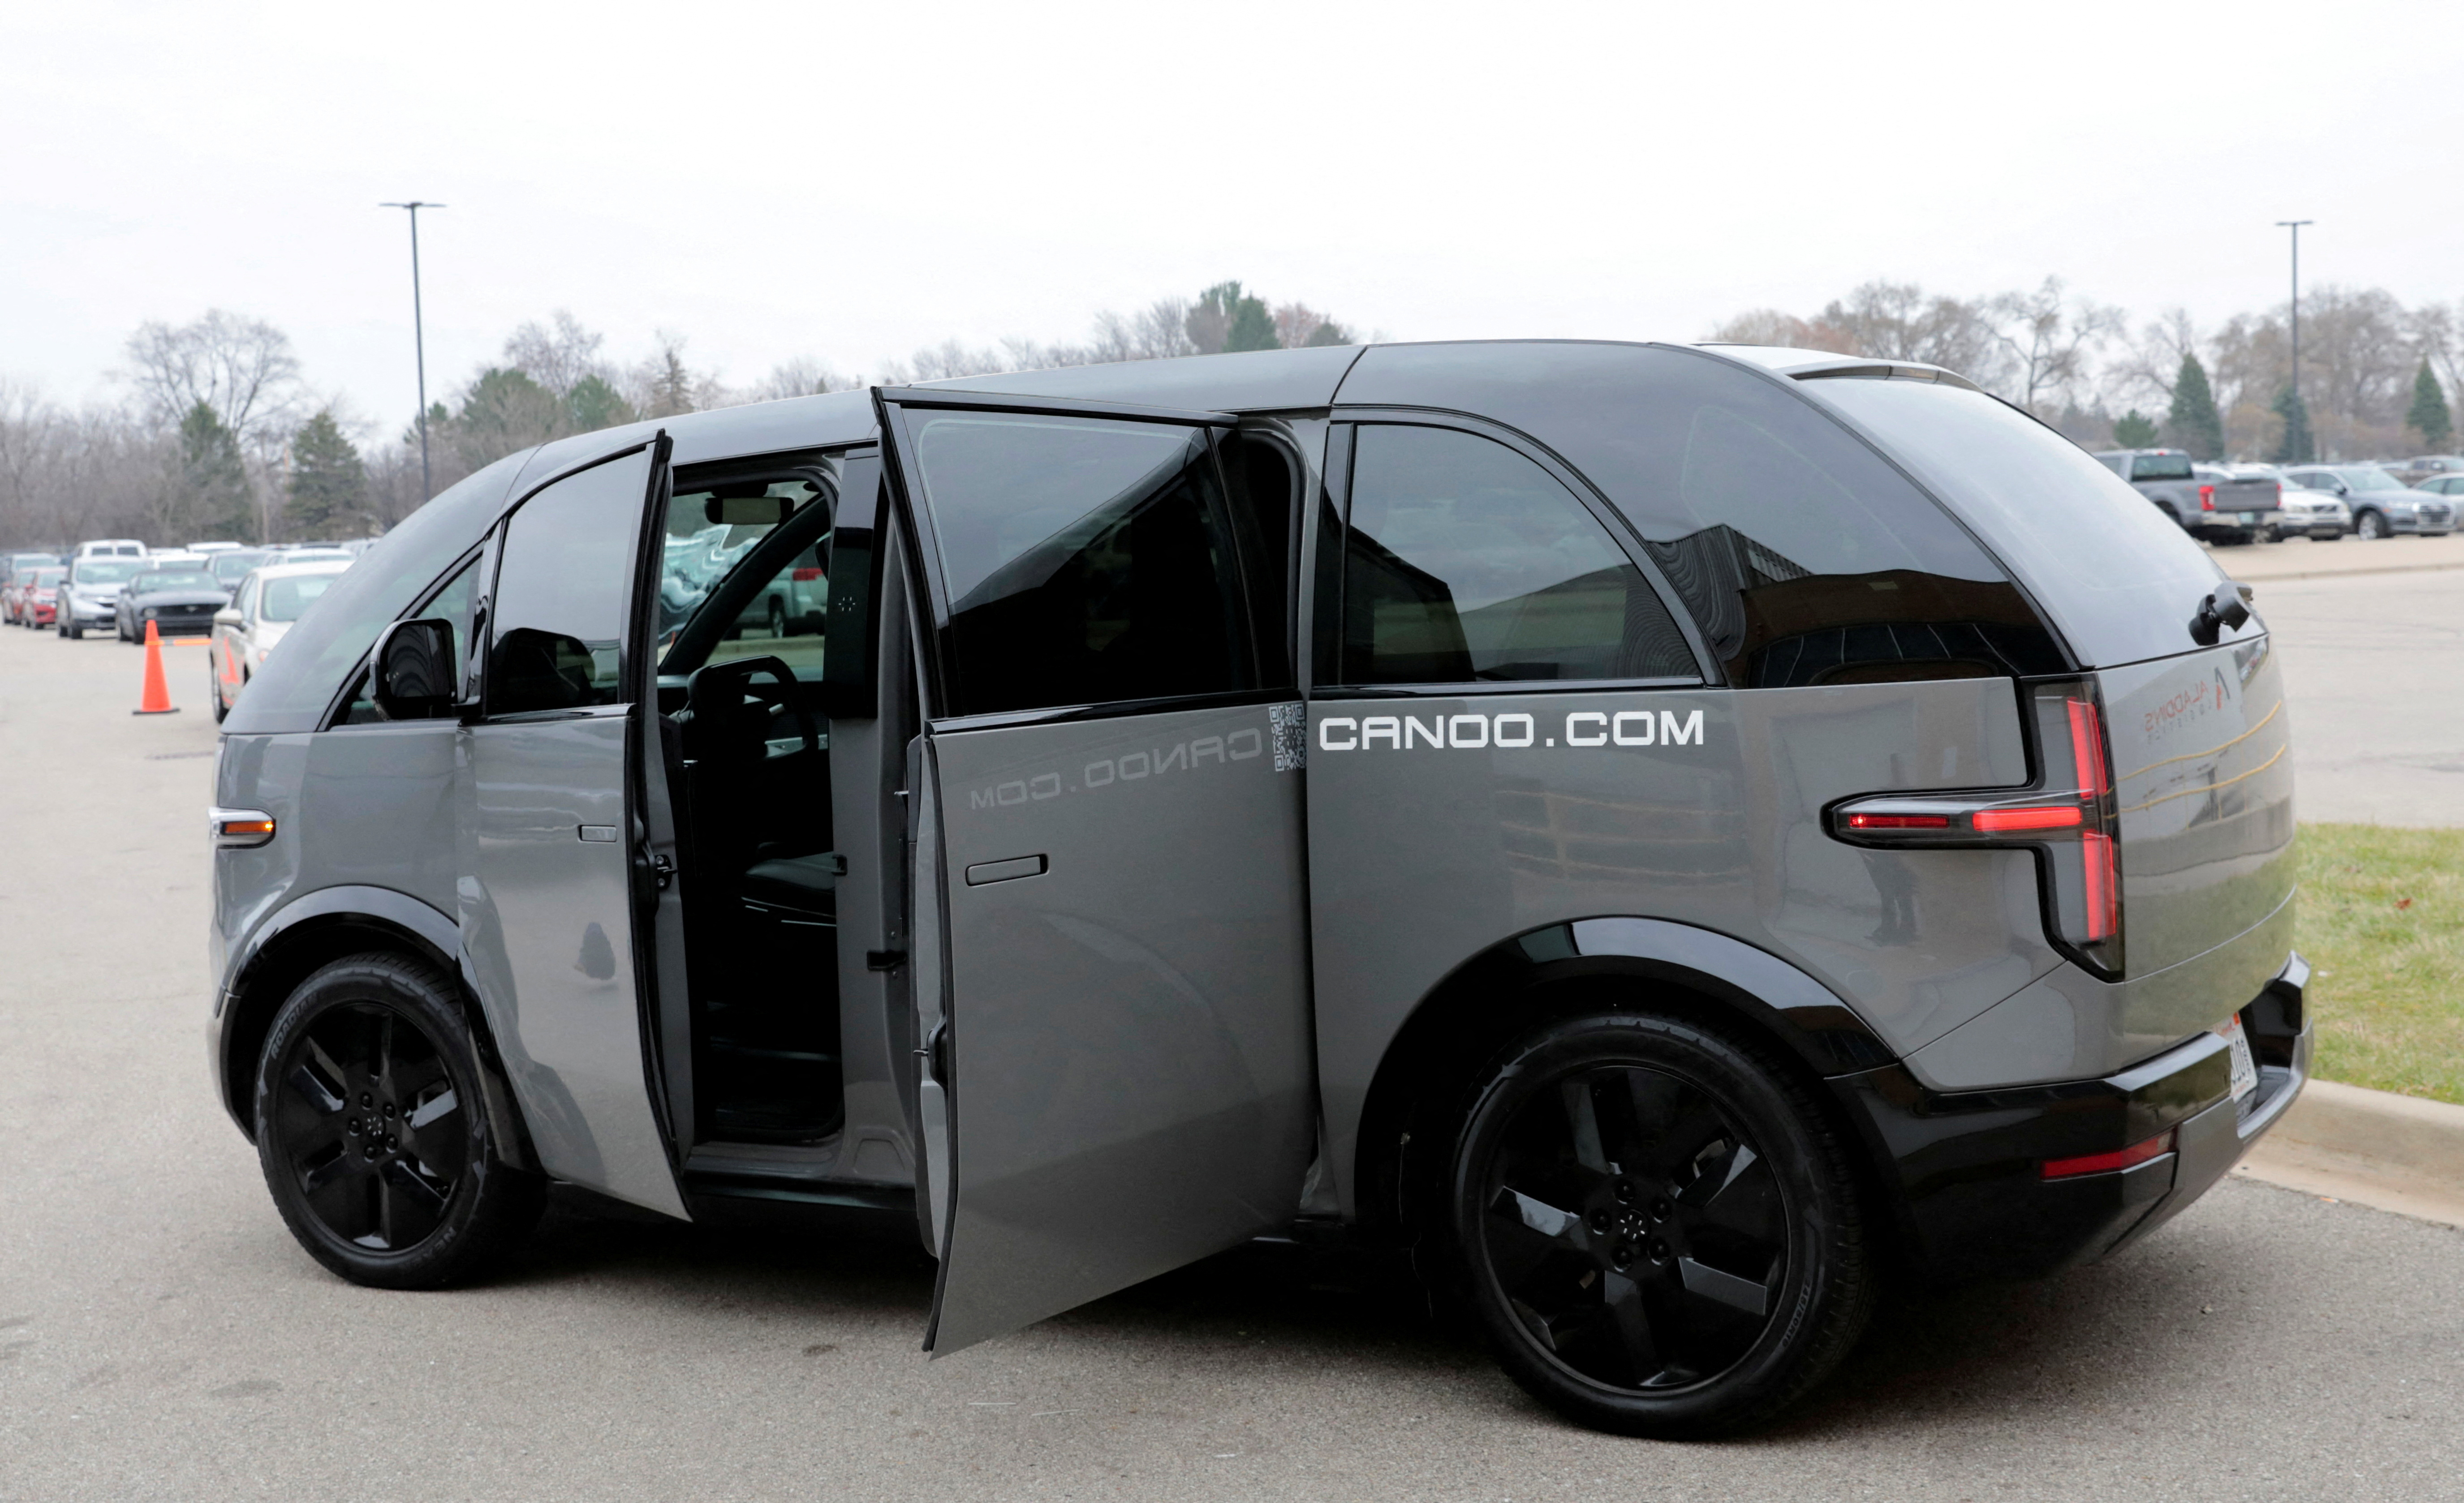 A general view shows a Canoo LV (Lifestyle Vehicle) electric vehicle outside a manufacturing site